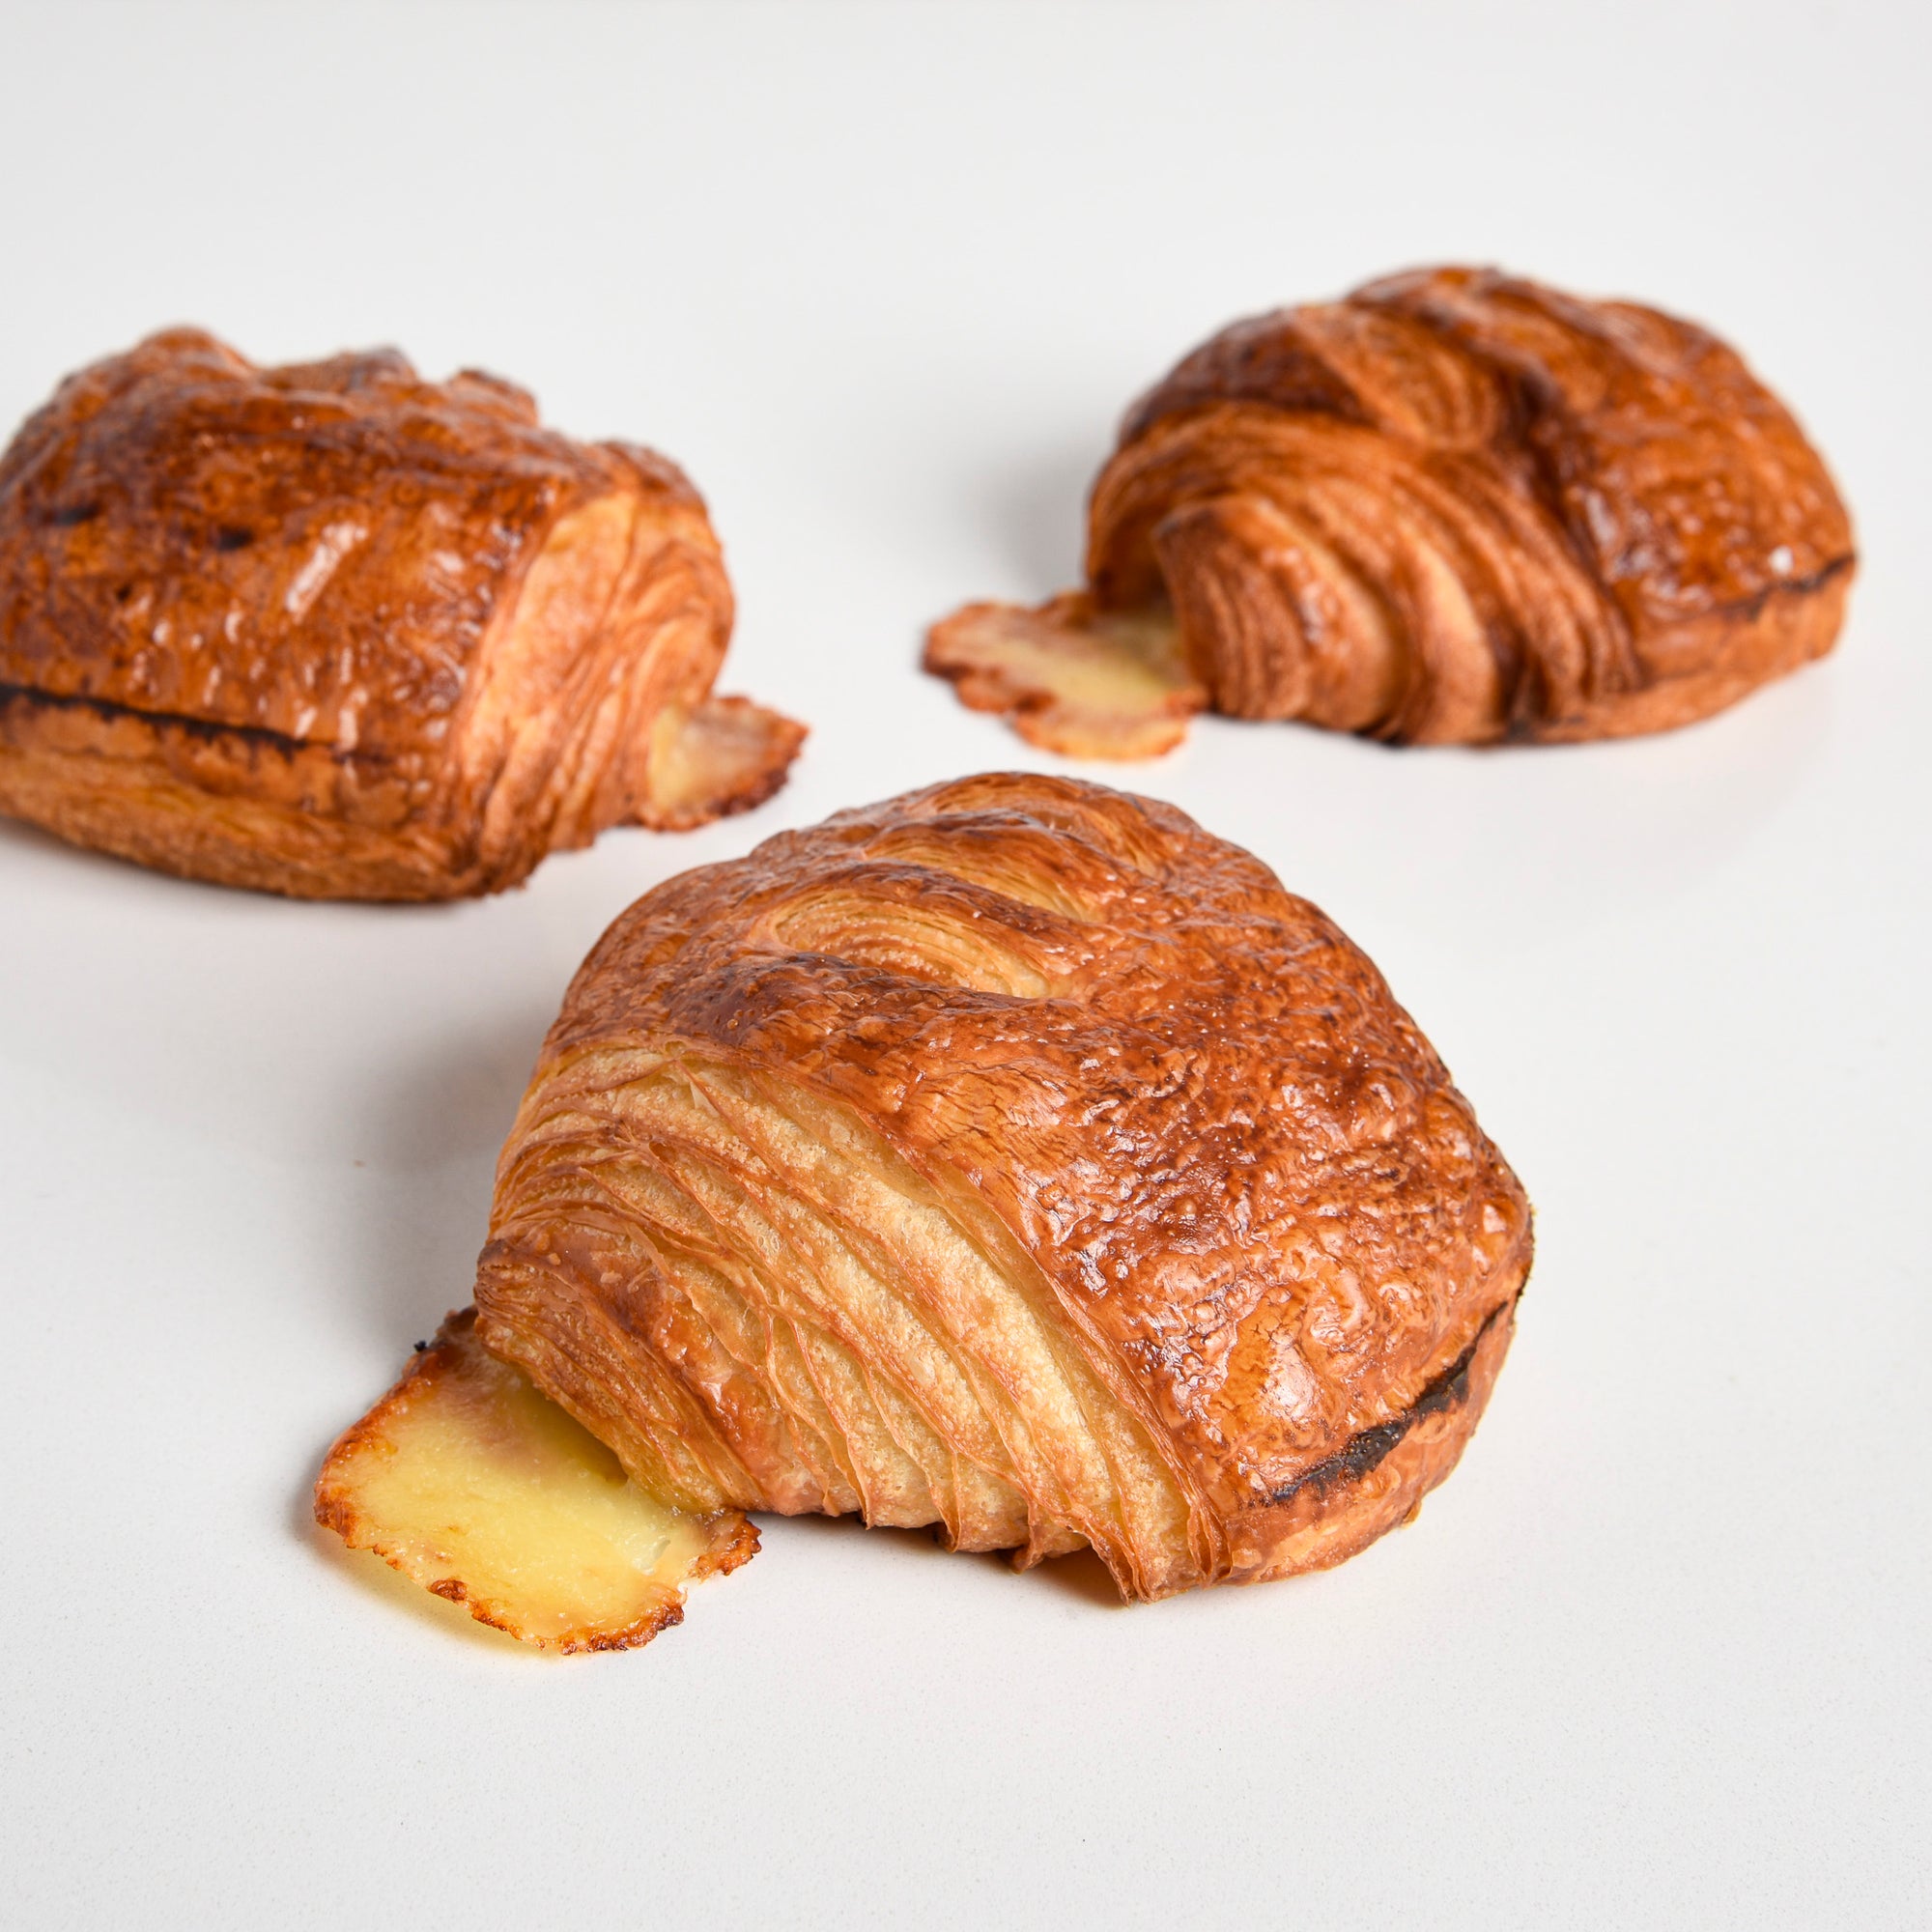 Group of Cross section of Le fournil bakery pain au jambon fromage croissant with ham and Emmental cheese